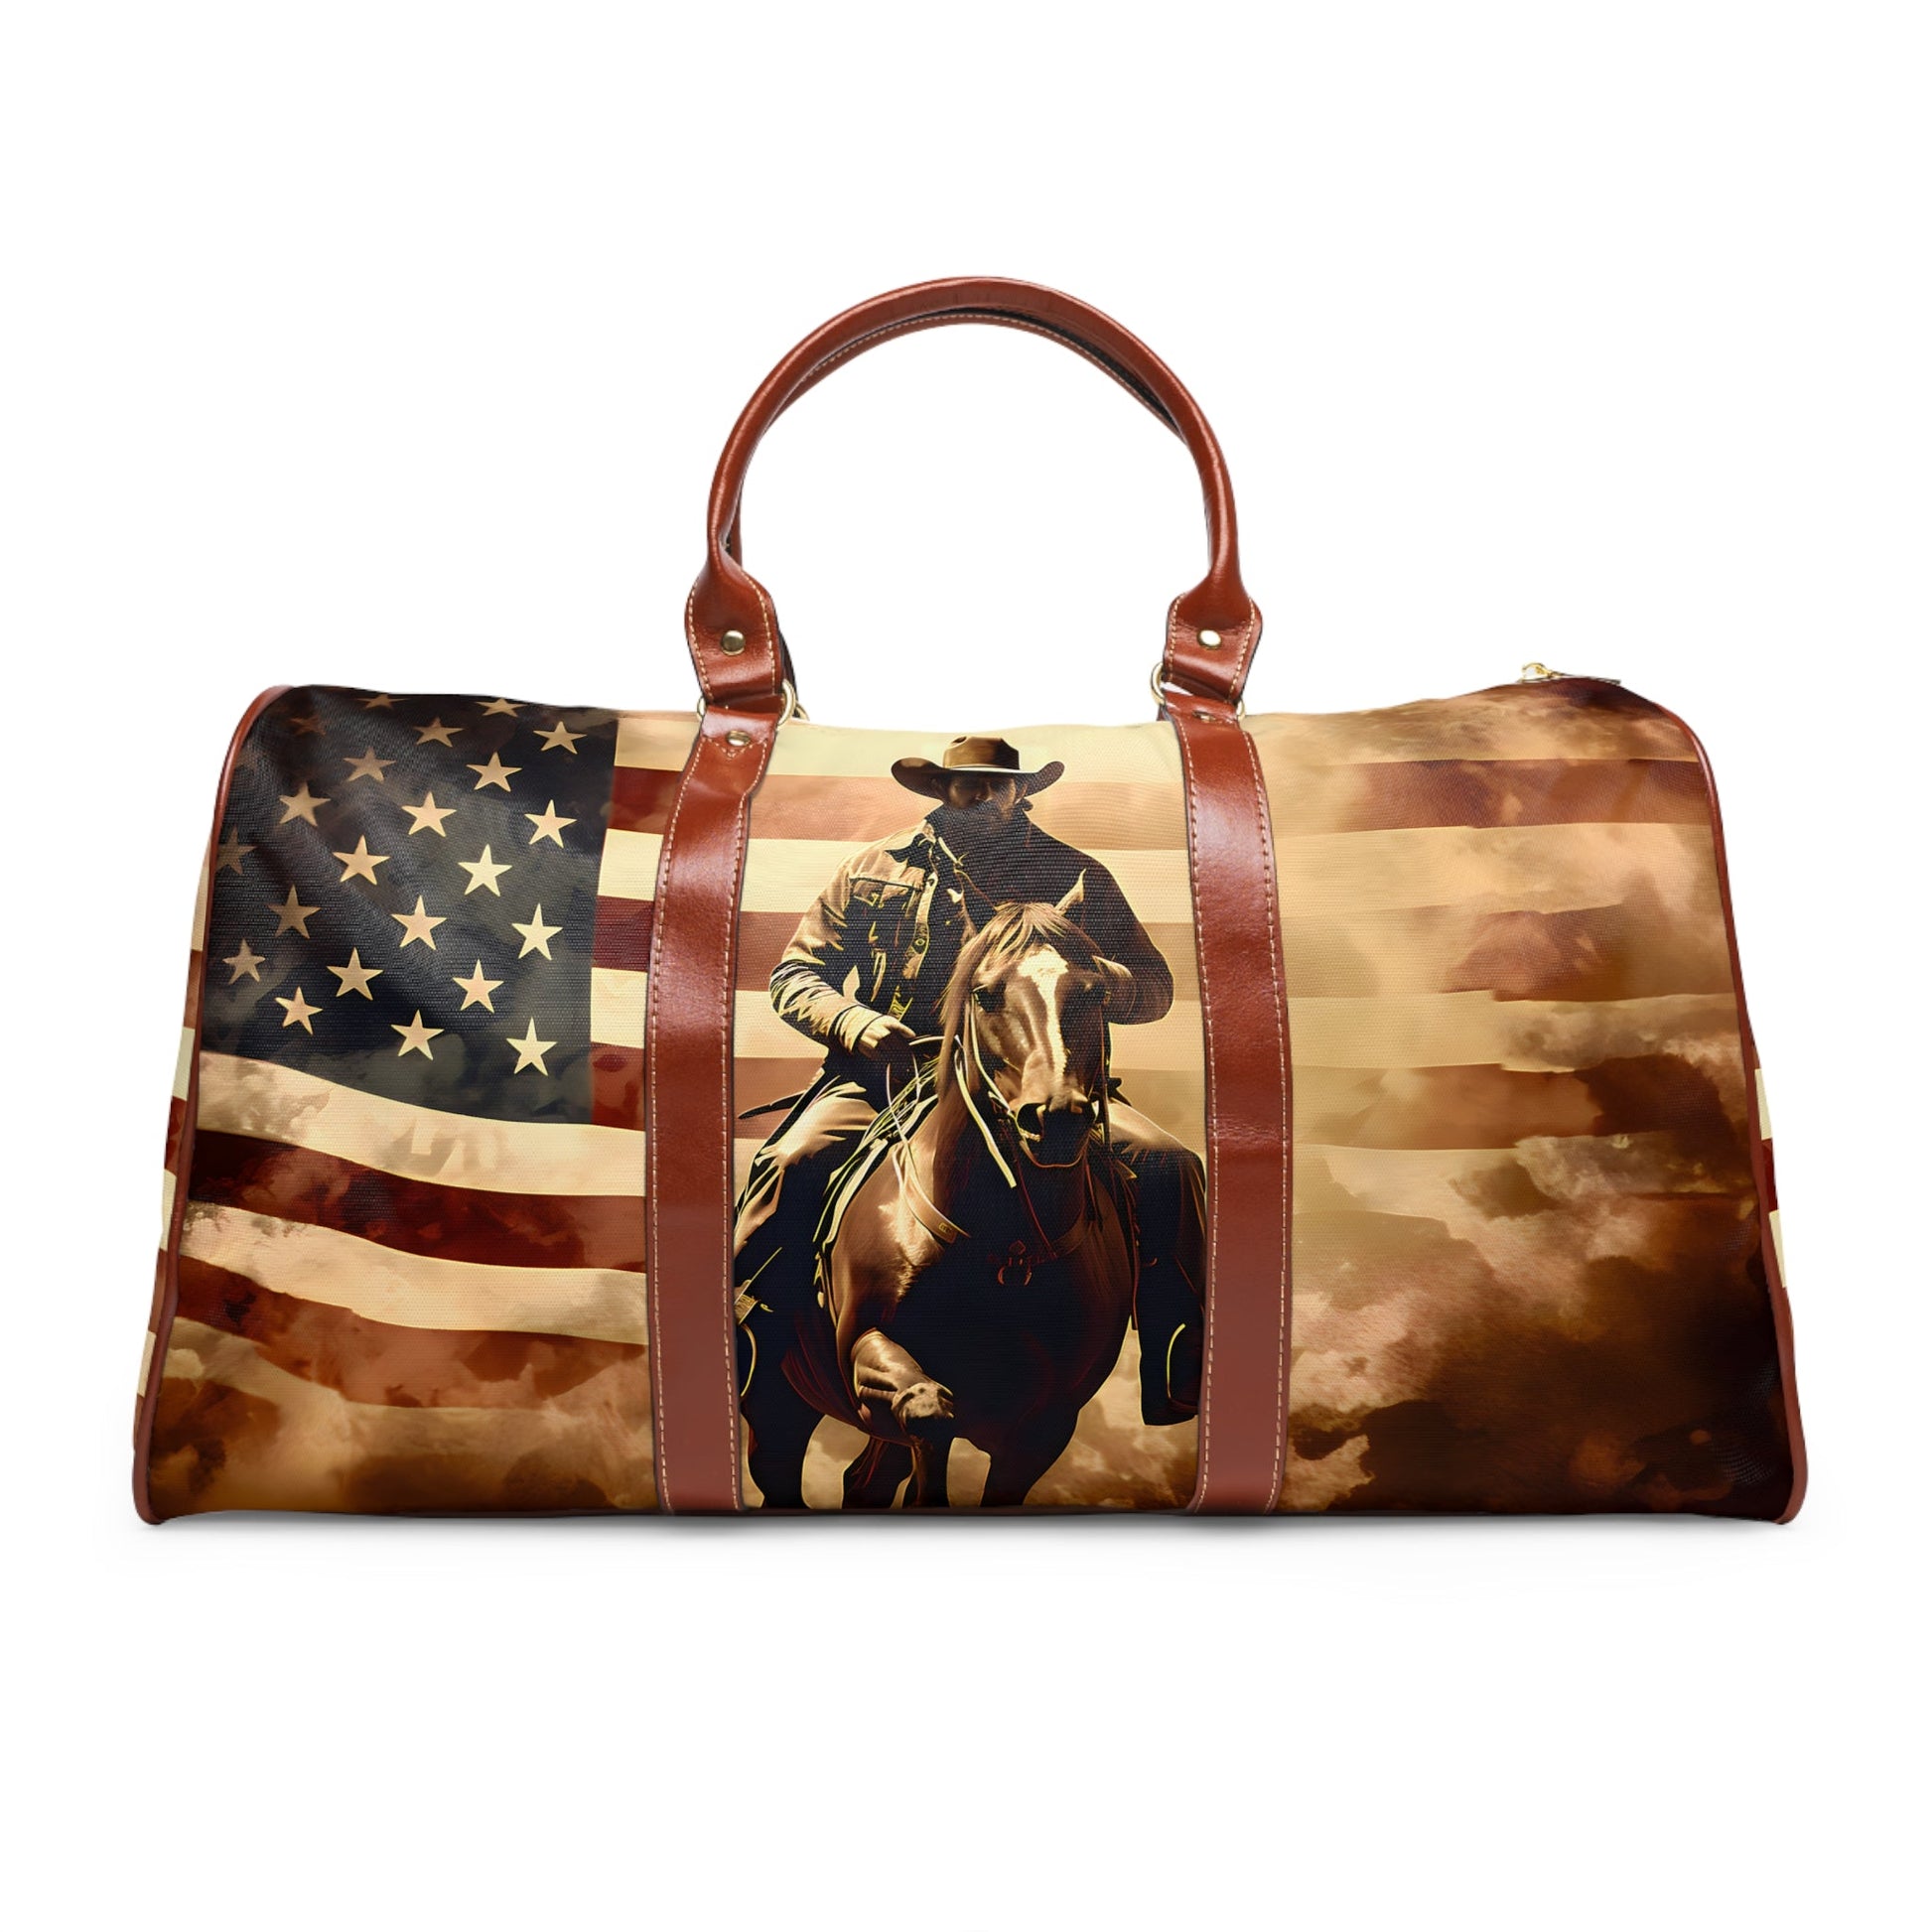 American Cowboy Art Travel Bag - Bigger than most duffle bags, tote bags and even most weekender bags!